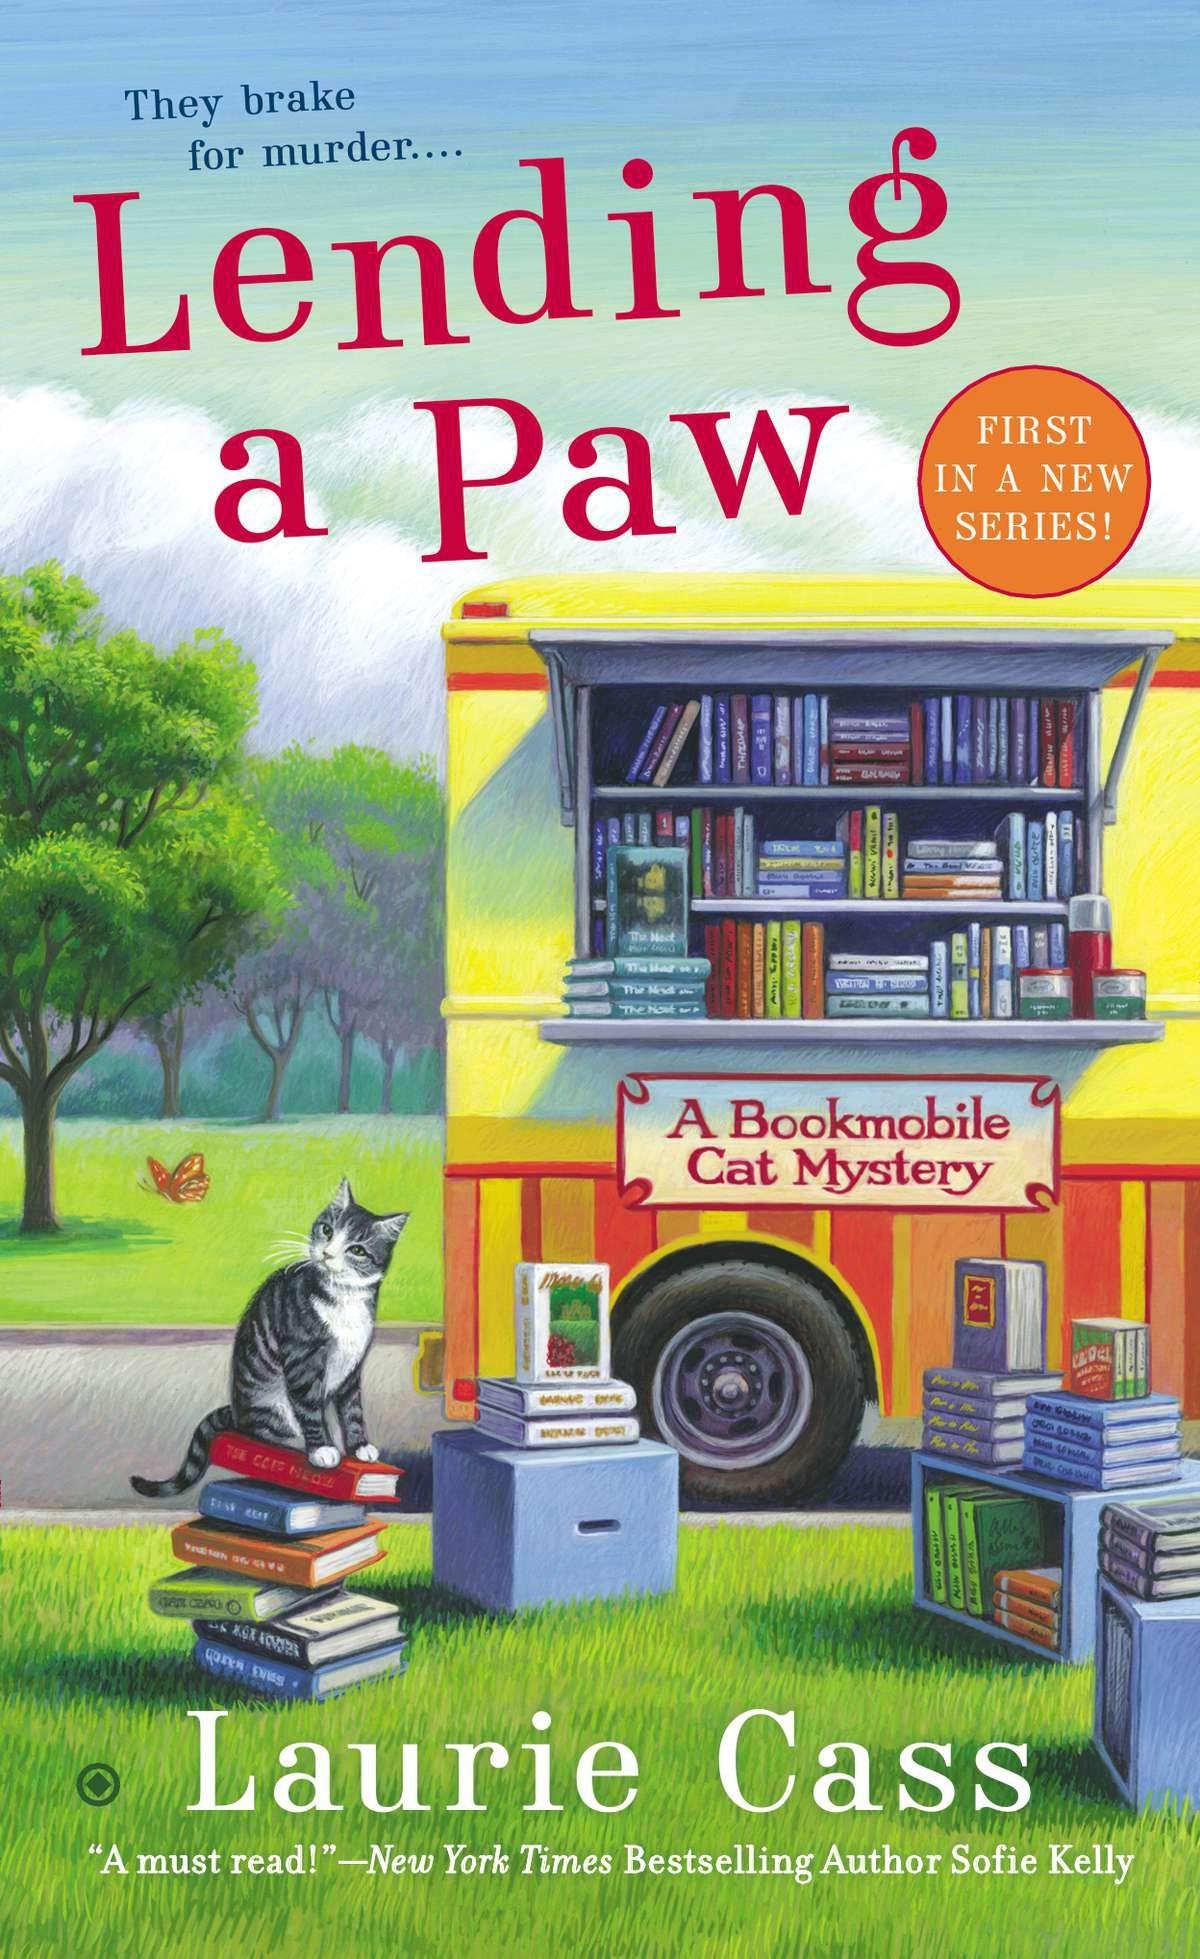 Lending a Paw: A Bookmobile Cat Mystery